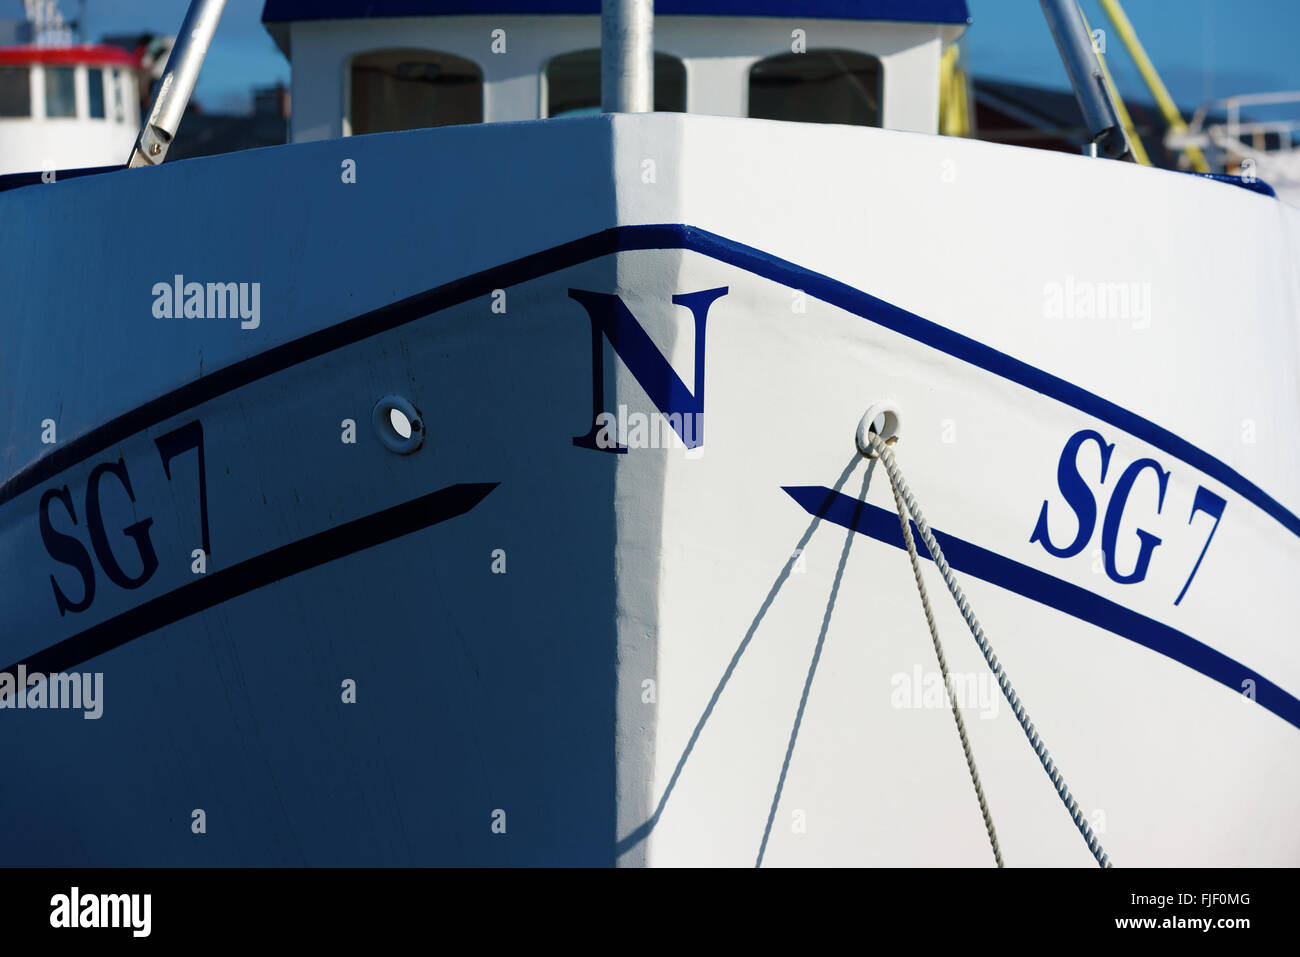 Nogersund, Sweden - February 27, 2016: Close up of the fore of a white fishing boat. The letter N is printed front most and iden Stock Photo